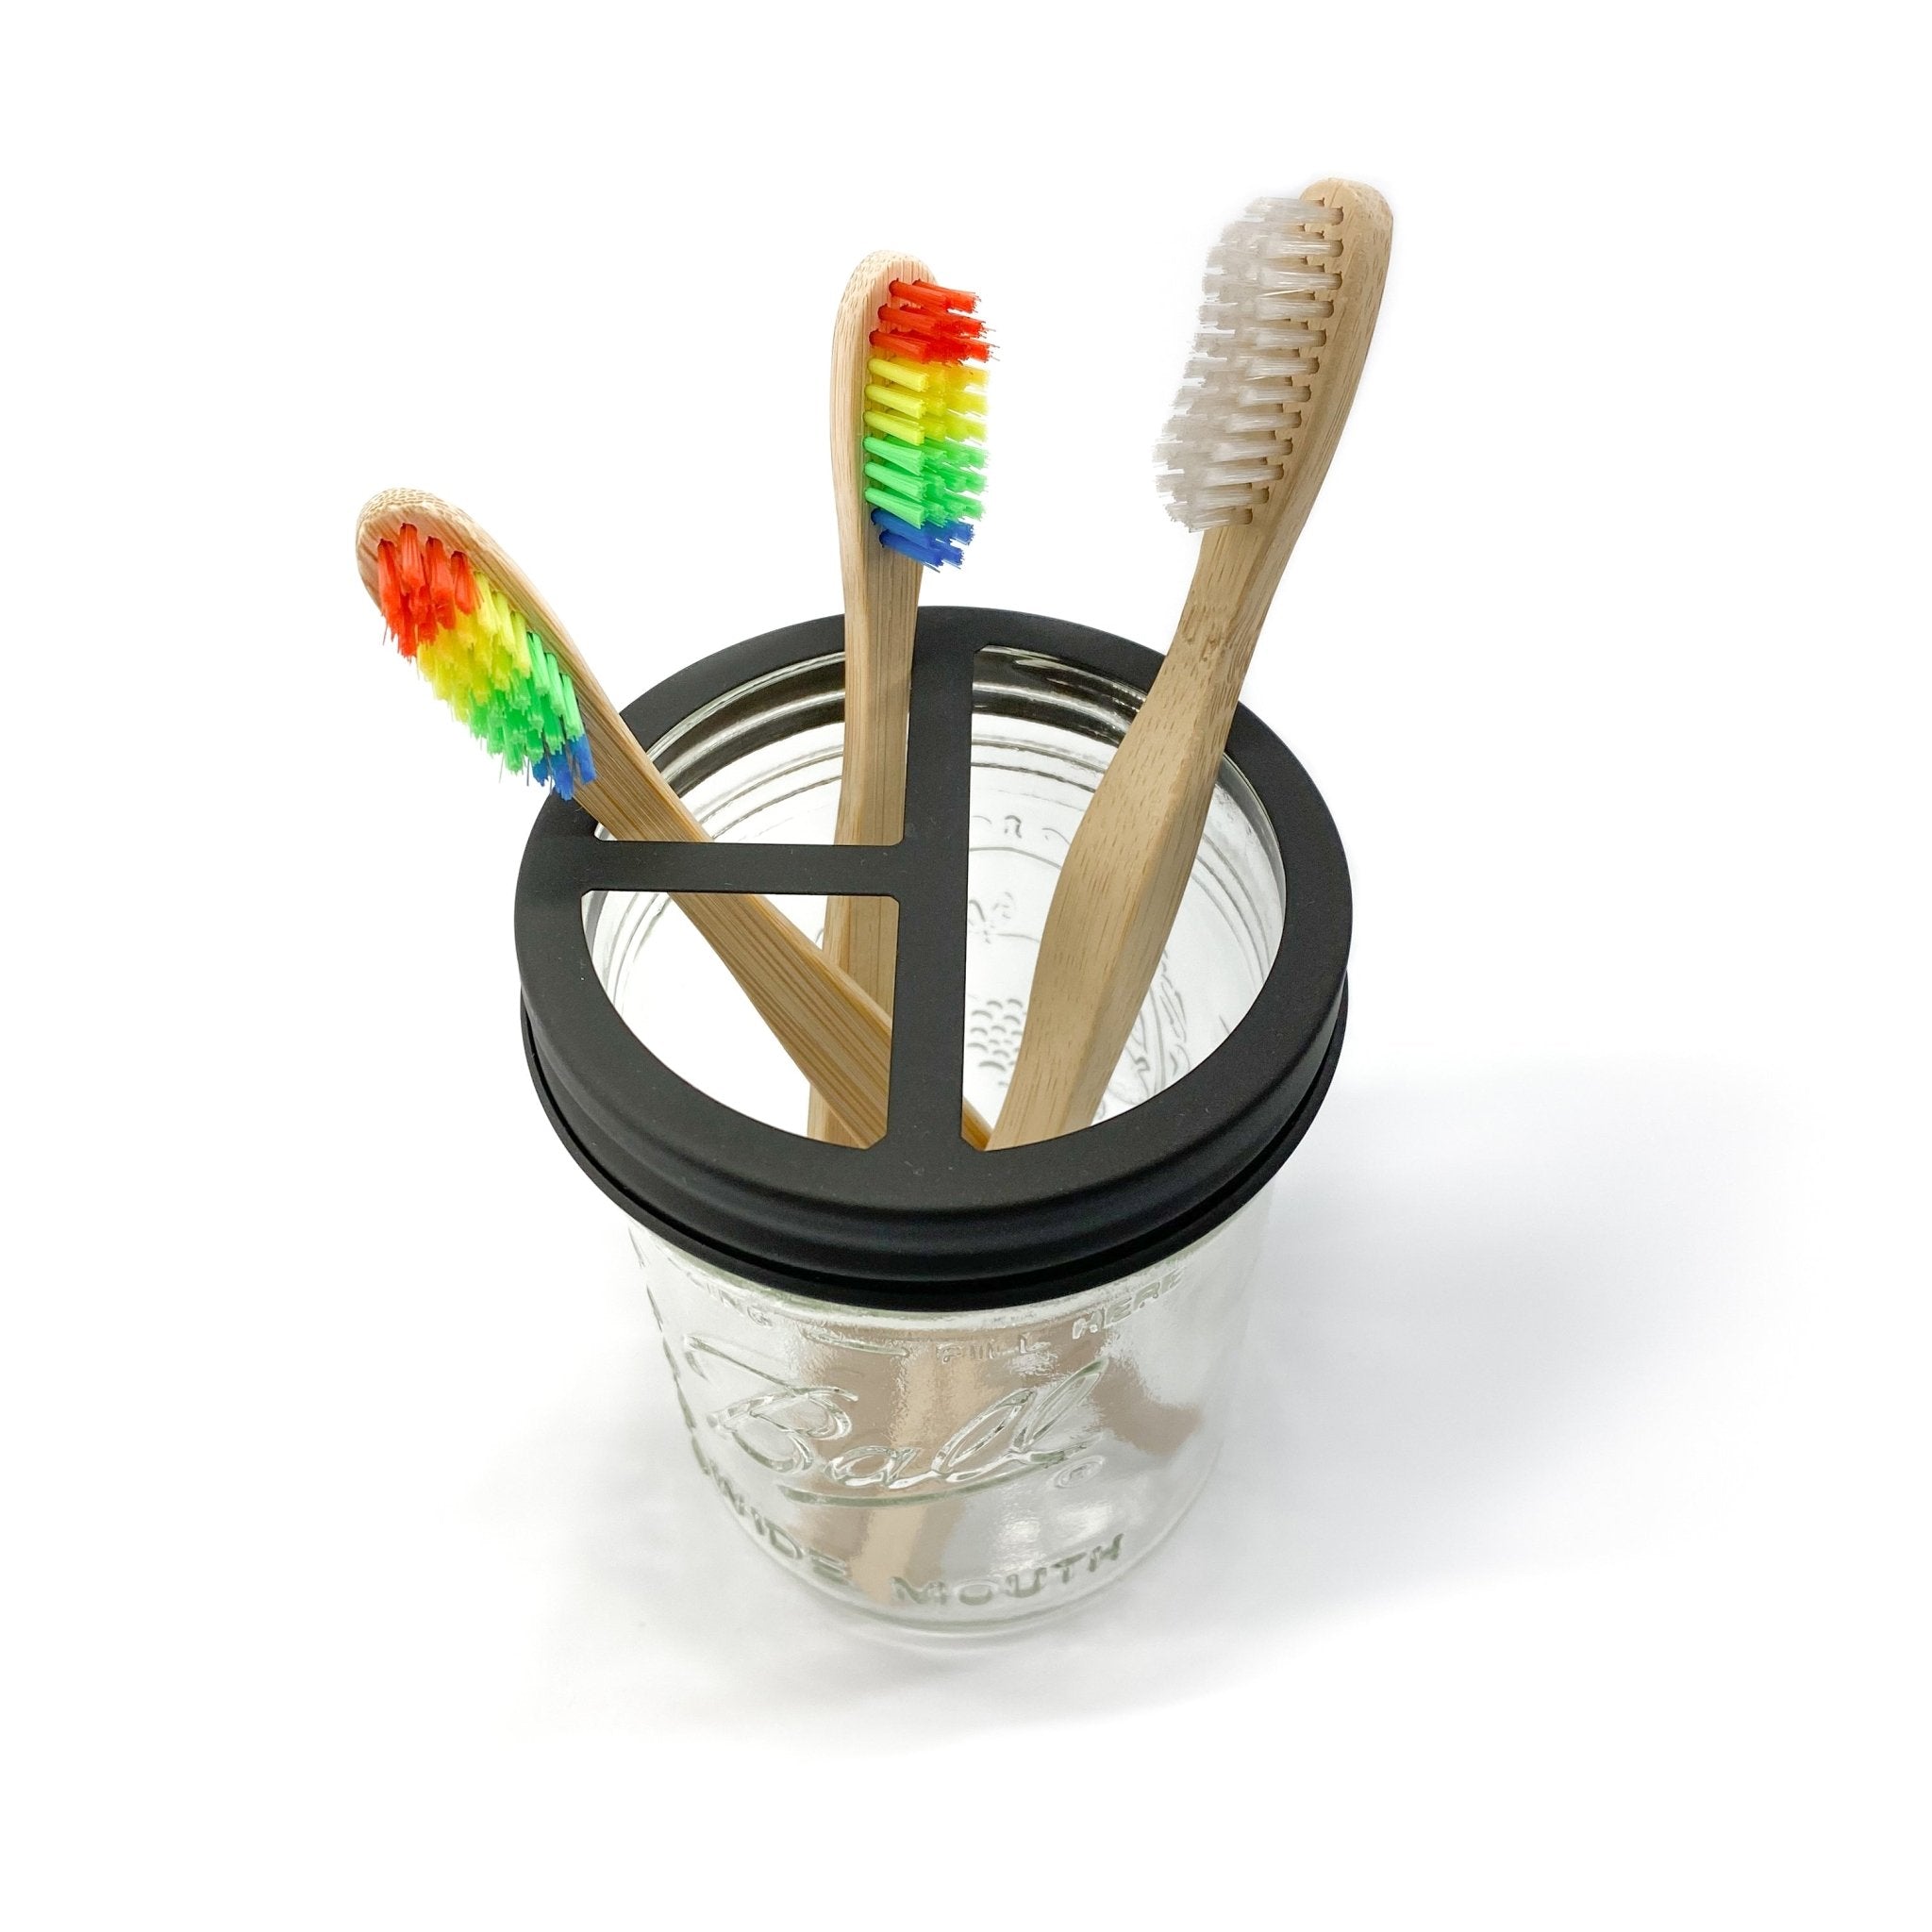 Toothbrush Holder Jar: Wide Mouth - Marley's Monsters